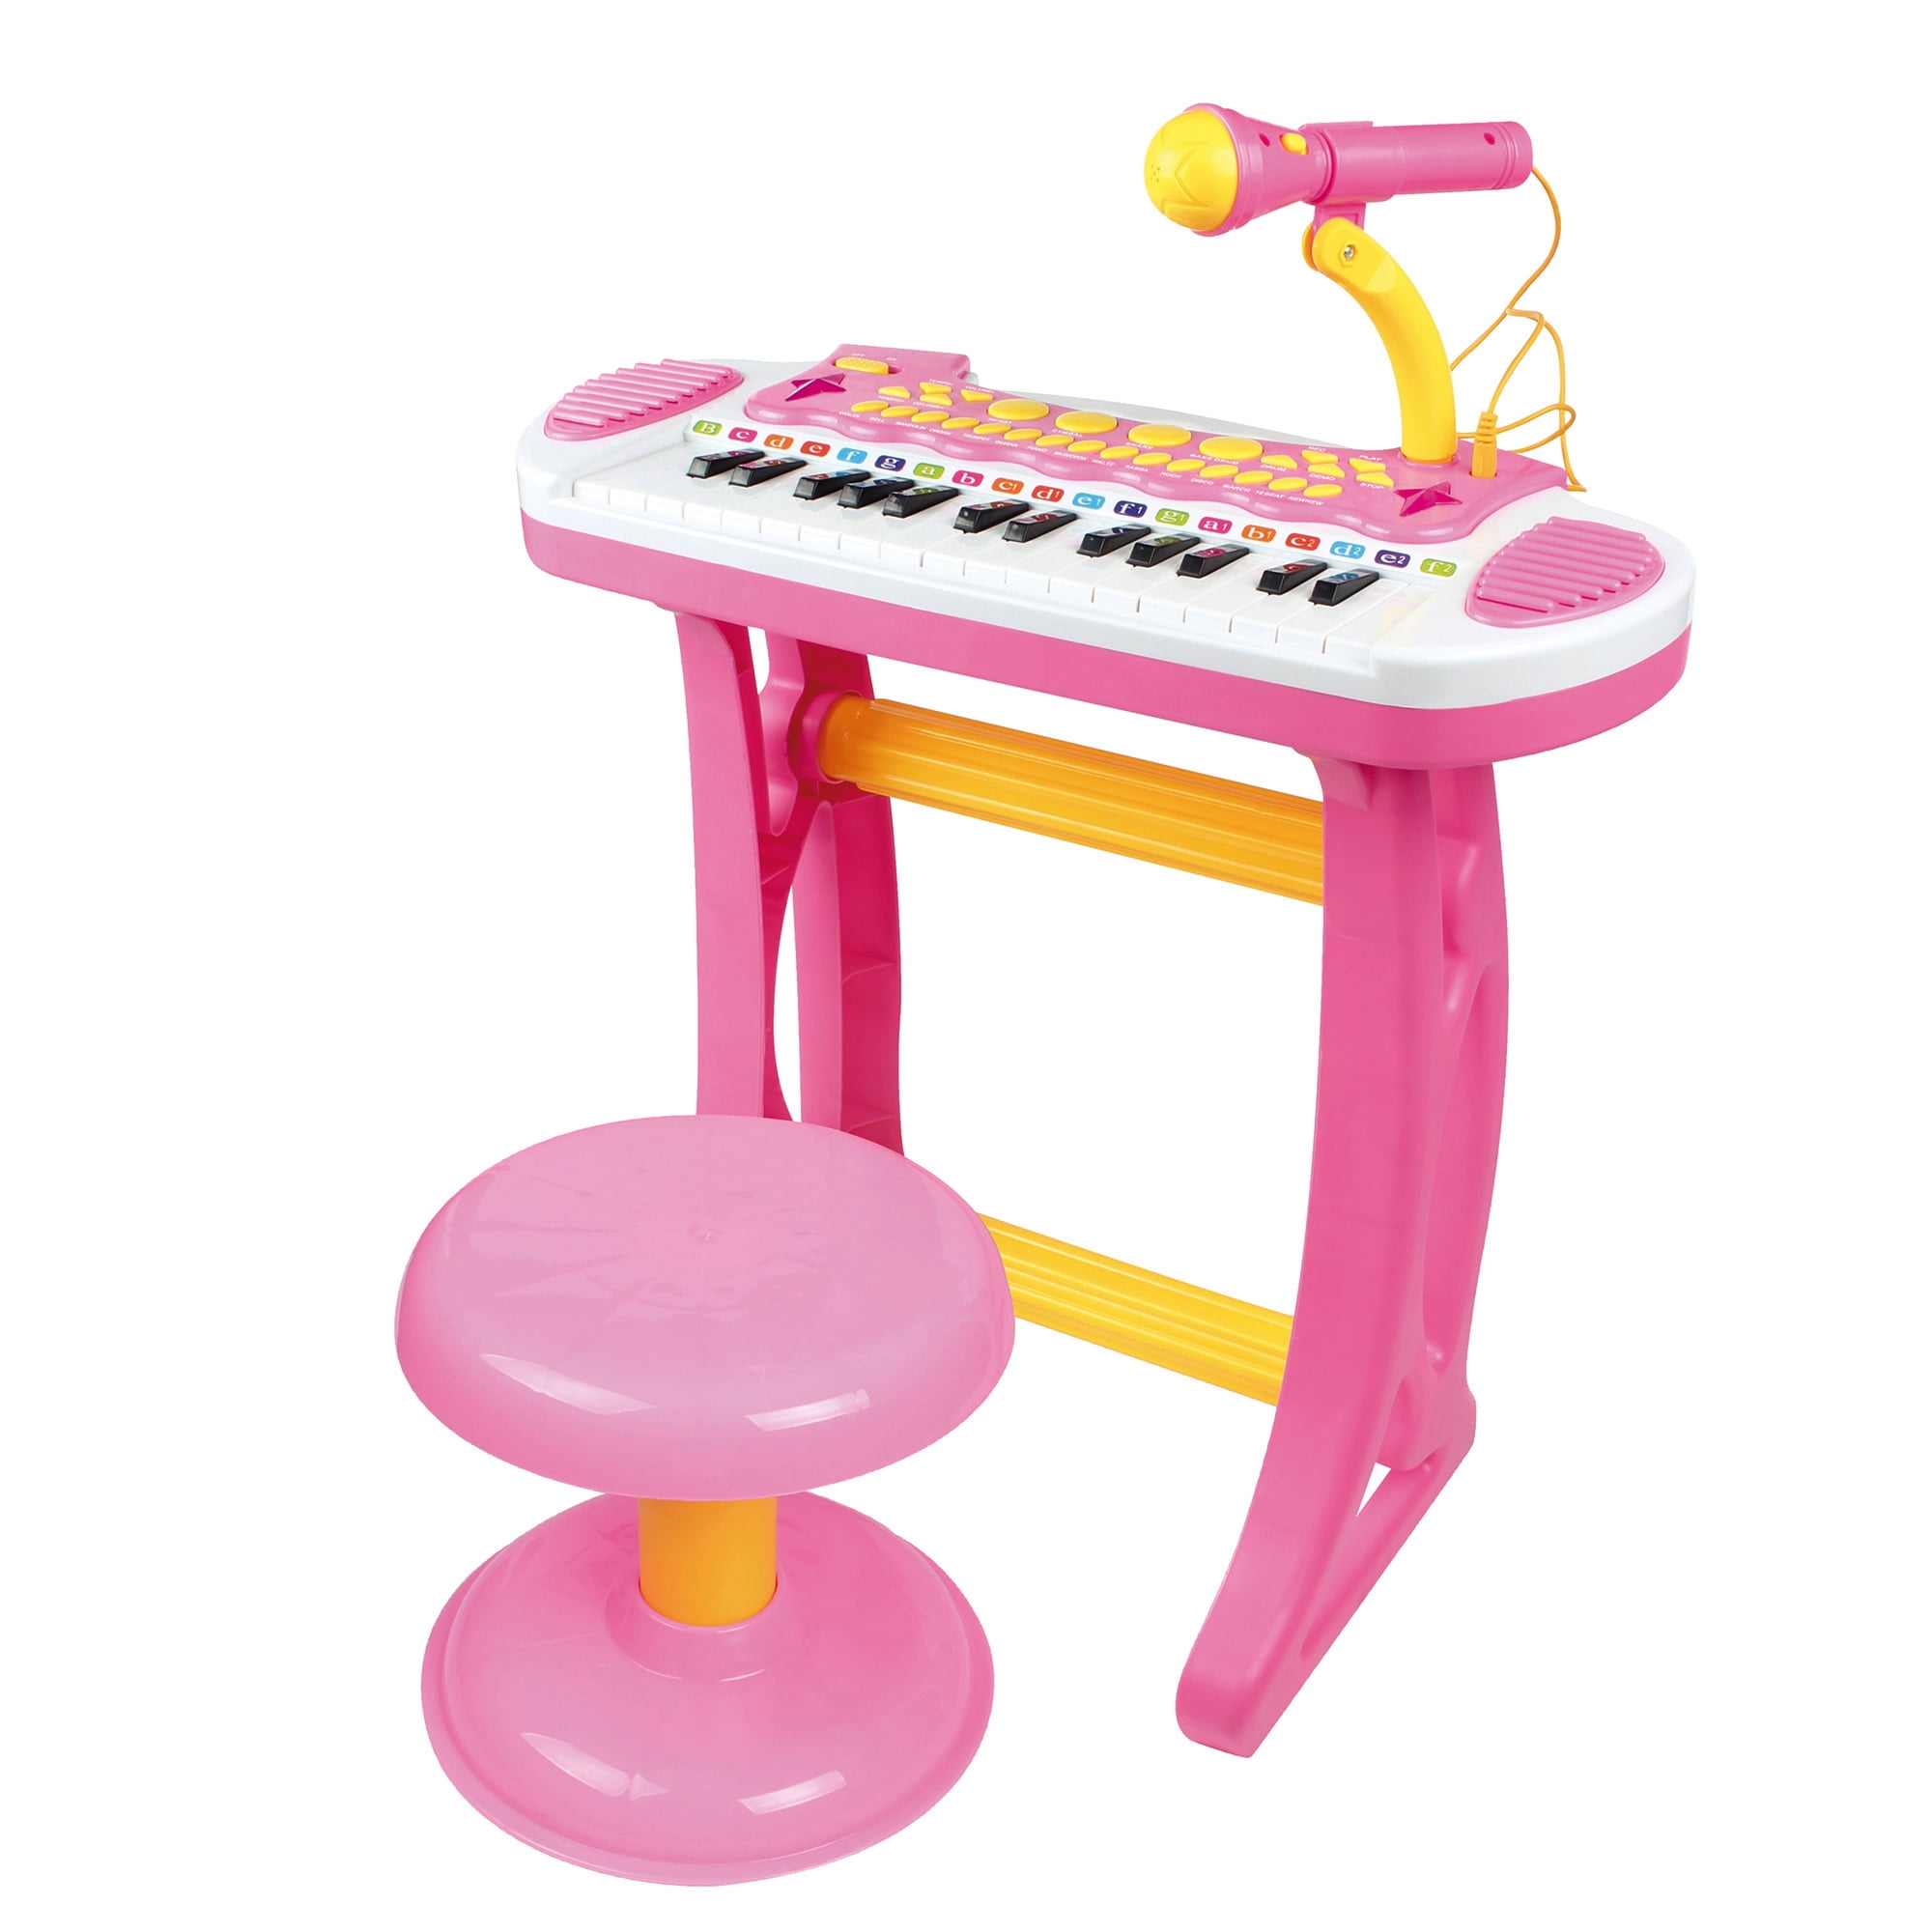 Kids Electronic Keyboard  6-IN-1 Piano Musical Toy w/ Microphone & Stool & drum 